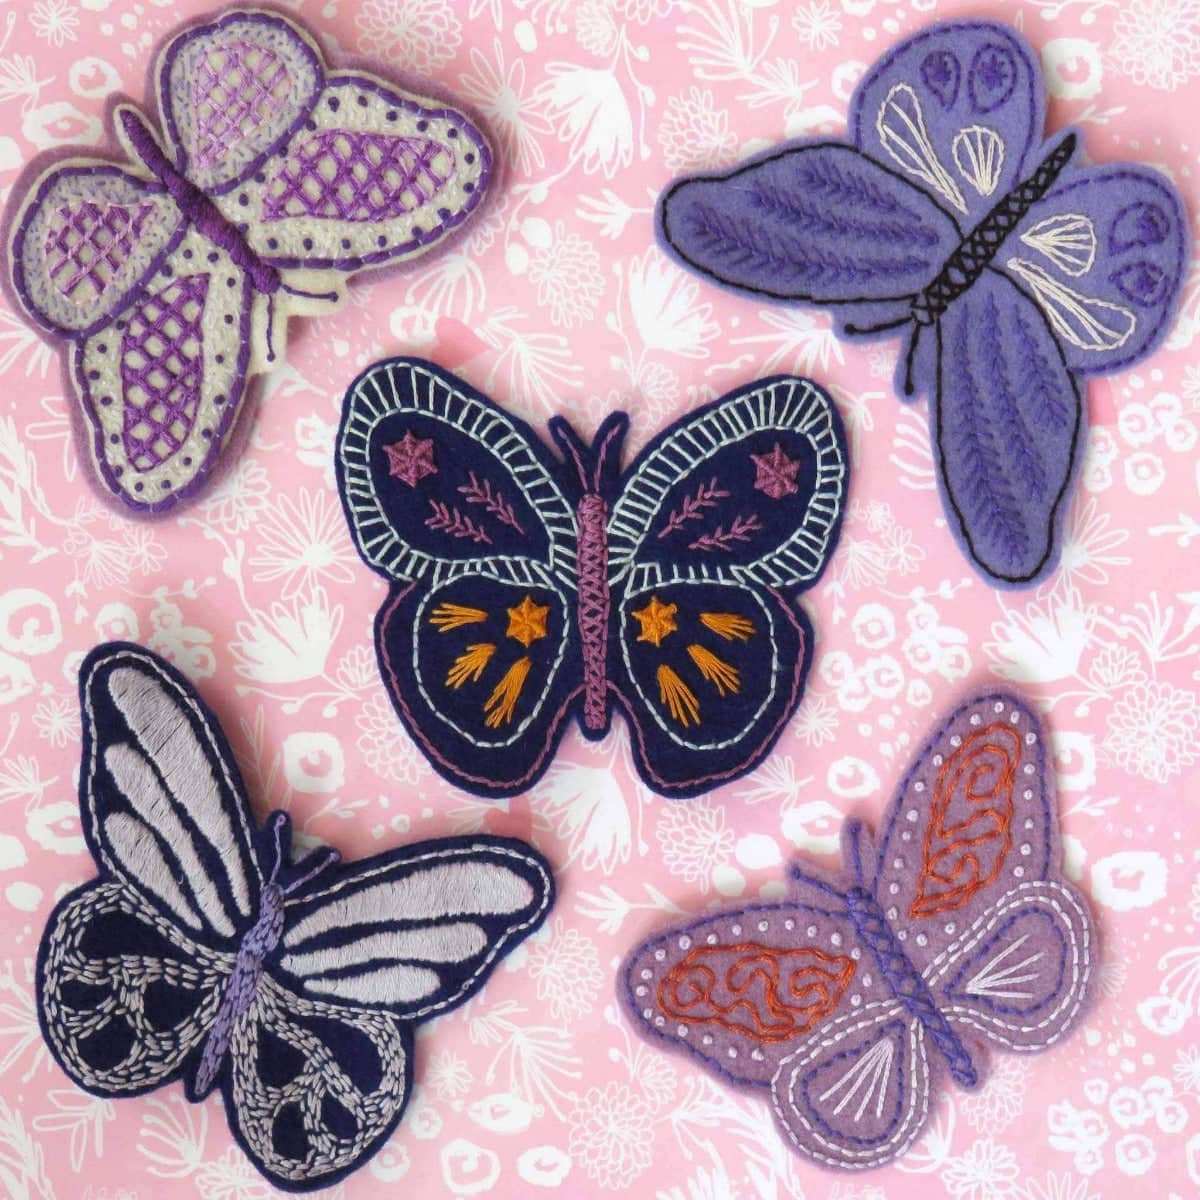 Felt Butterflies Hand Embroidery Pattern , PDF Download , StitchDoodles , embroidery hoop kit, embroidery kits for adults, embroidery kits for beginners, hand embroidery, modern embroidery kits, PDF pattern, unique embroidery kits , StitchDoodles , shop.stitchdoodles.com